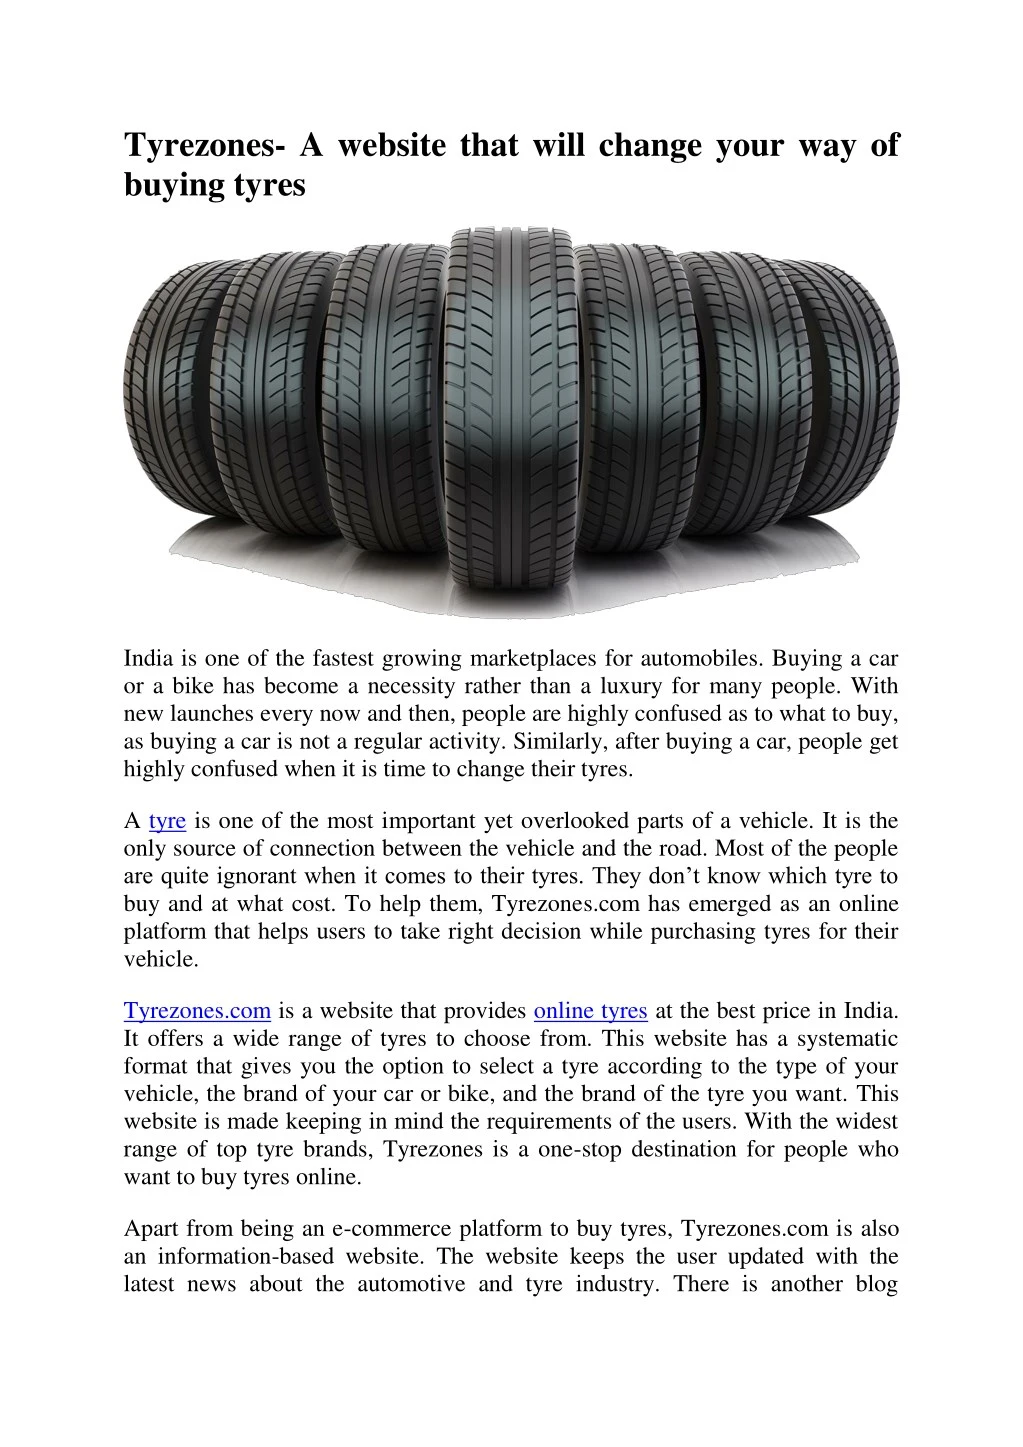 tyrezones a website that will change your